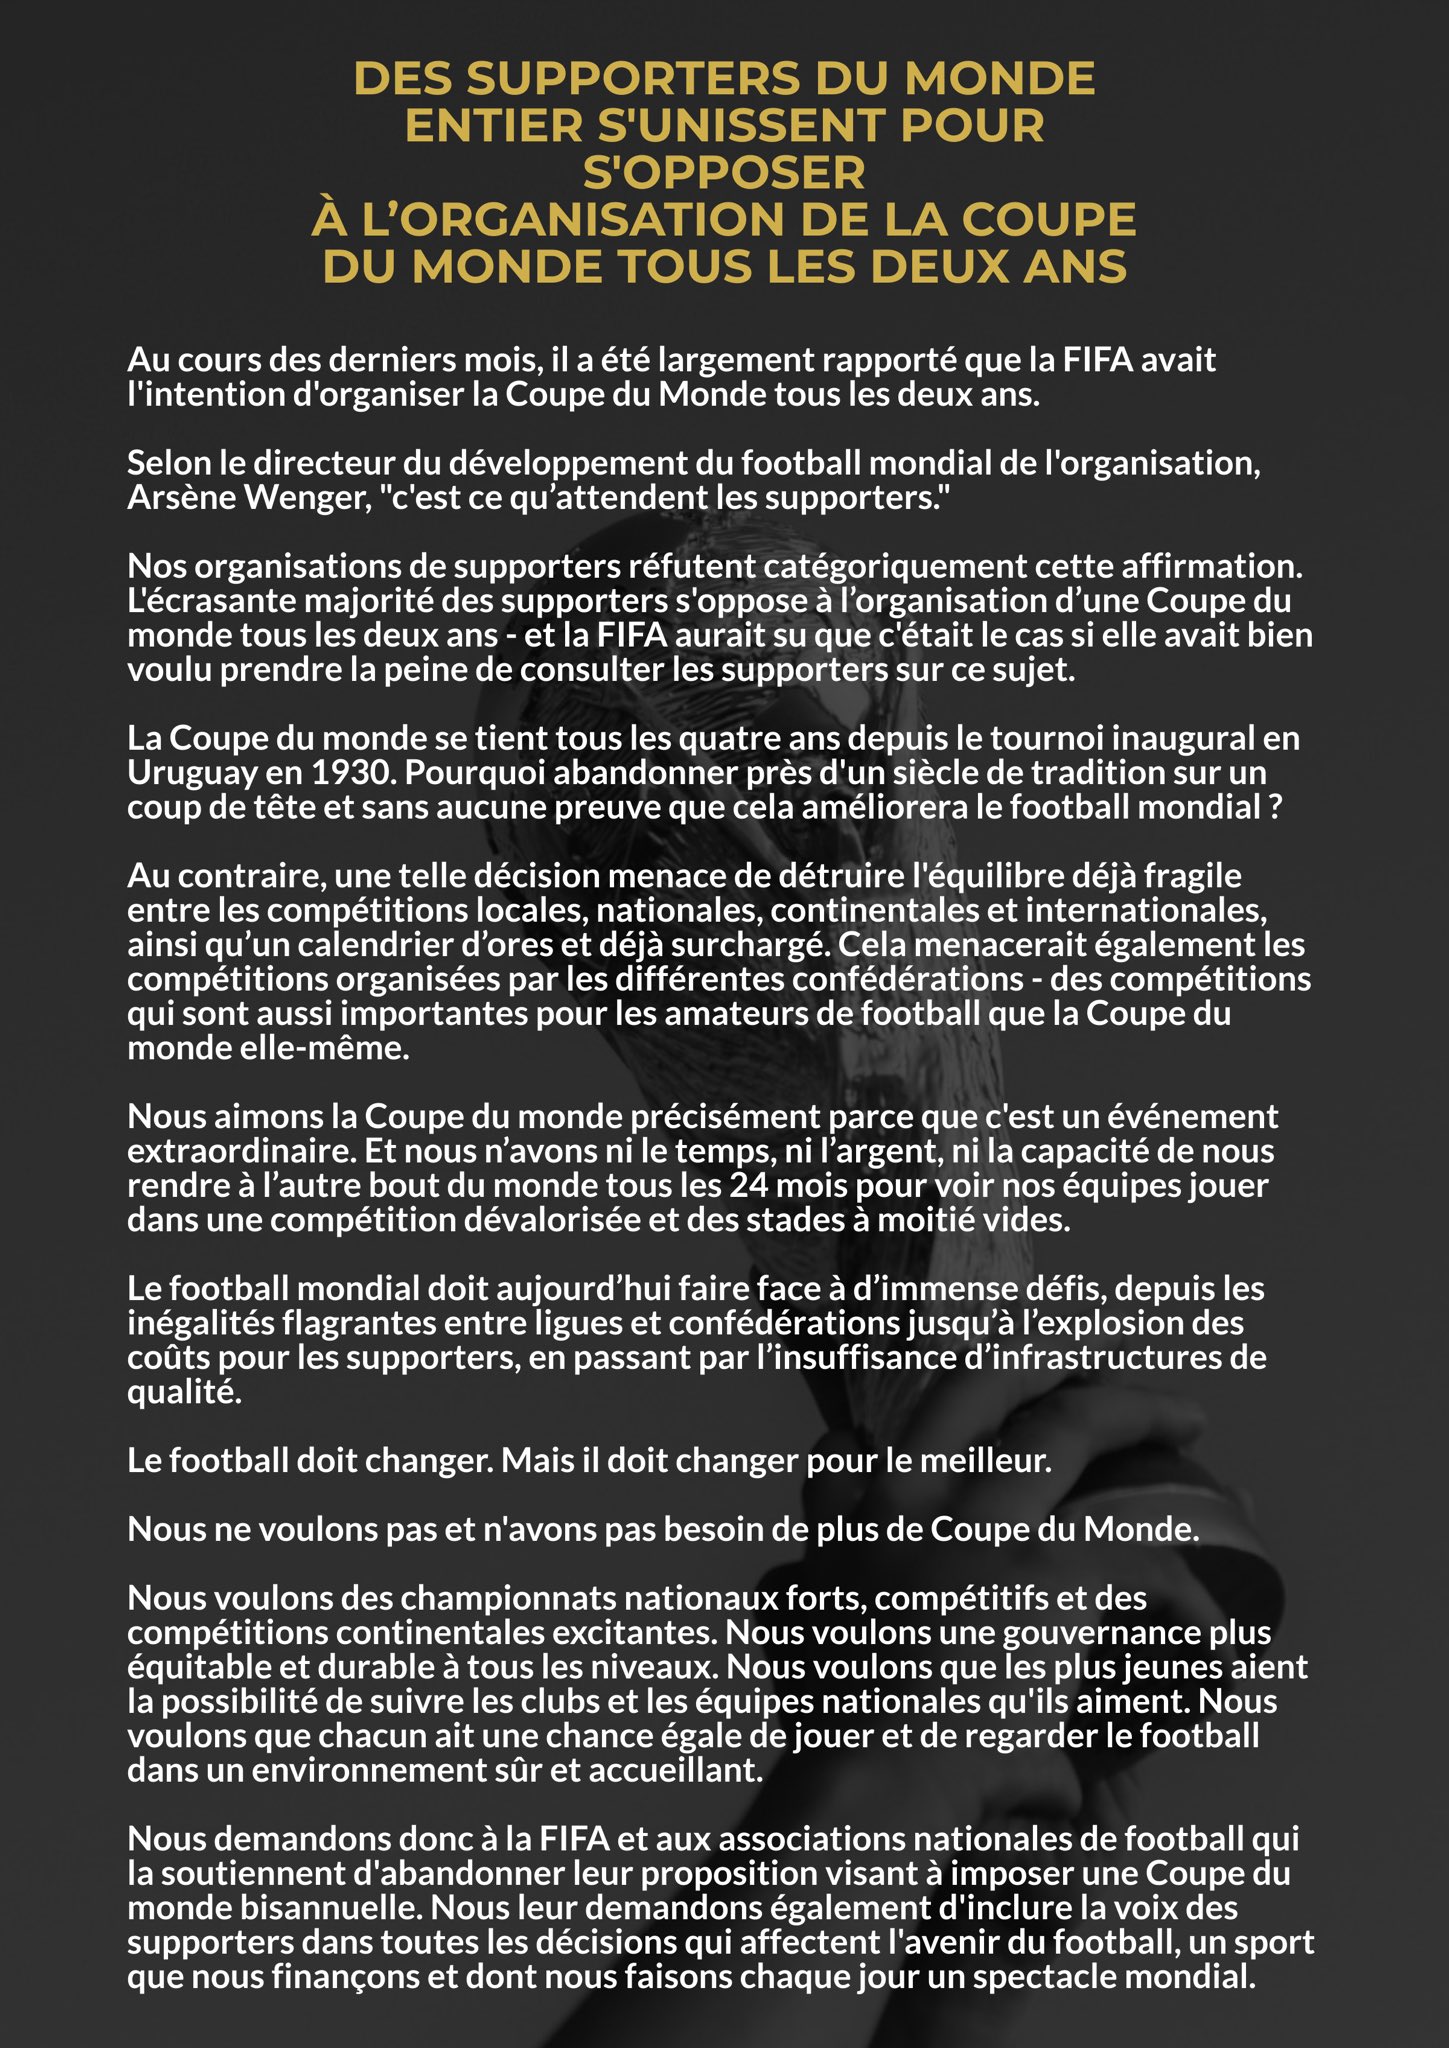 Fse Football Supporters Europe On Twitter Here S The List Of The First National Fans Groups From Across The 6 Football Confederations Who Have Signed The Statement Opposing Plans To Hold